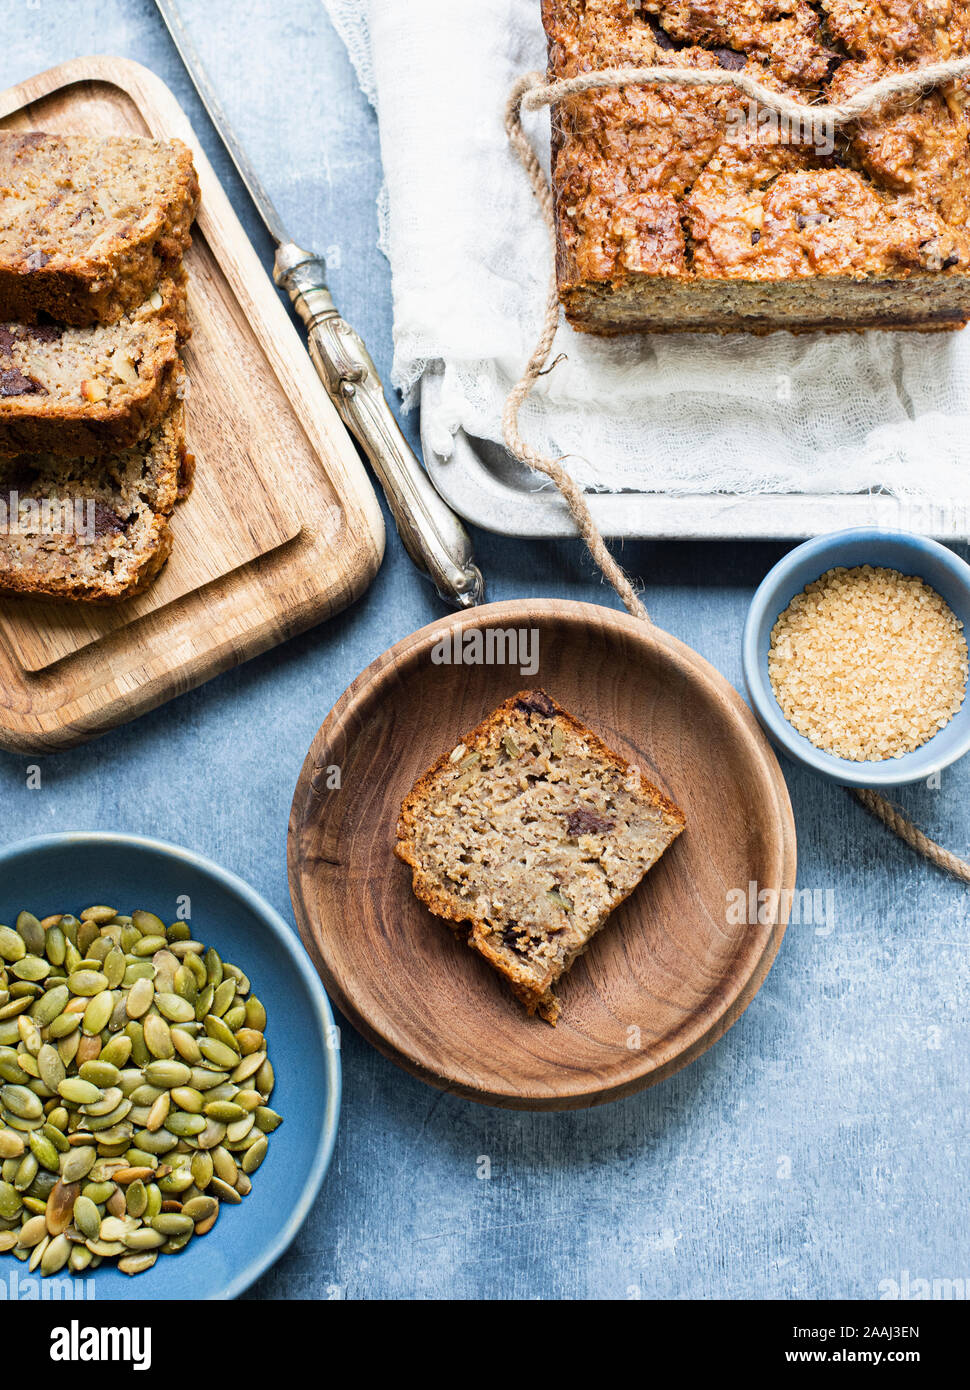 Slices of baked bread with pumpkin seeds and chocolate chips Stock Photo